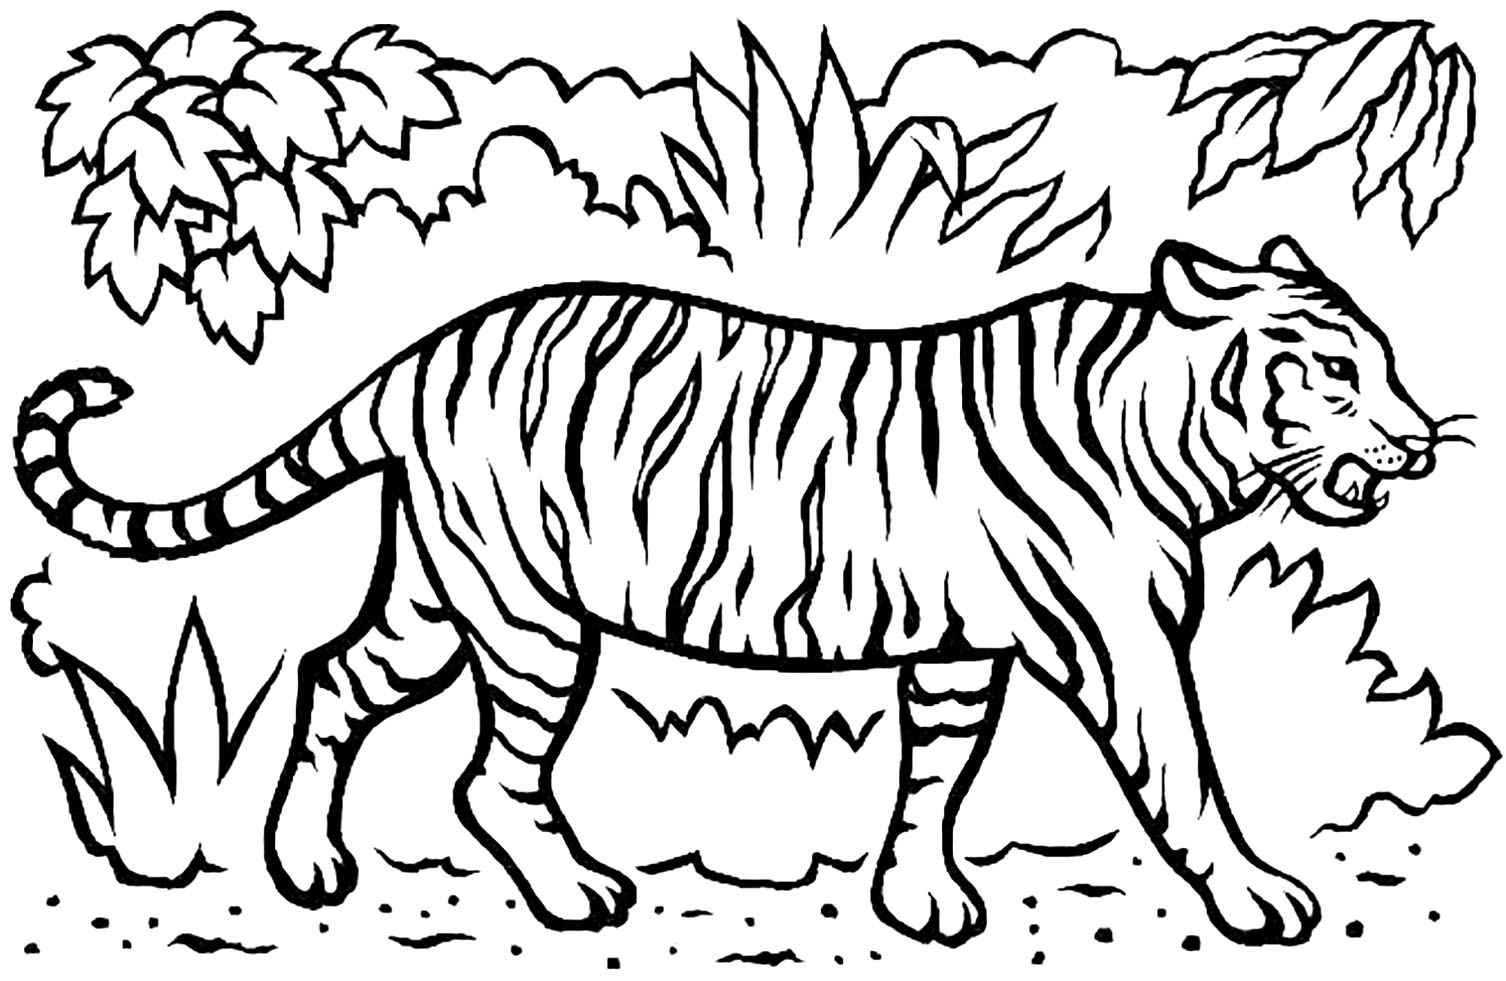 Tigers to download - Tigers Kids Coloring Pages